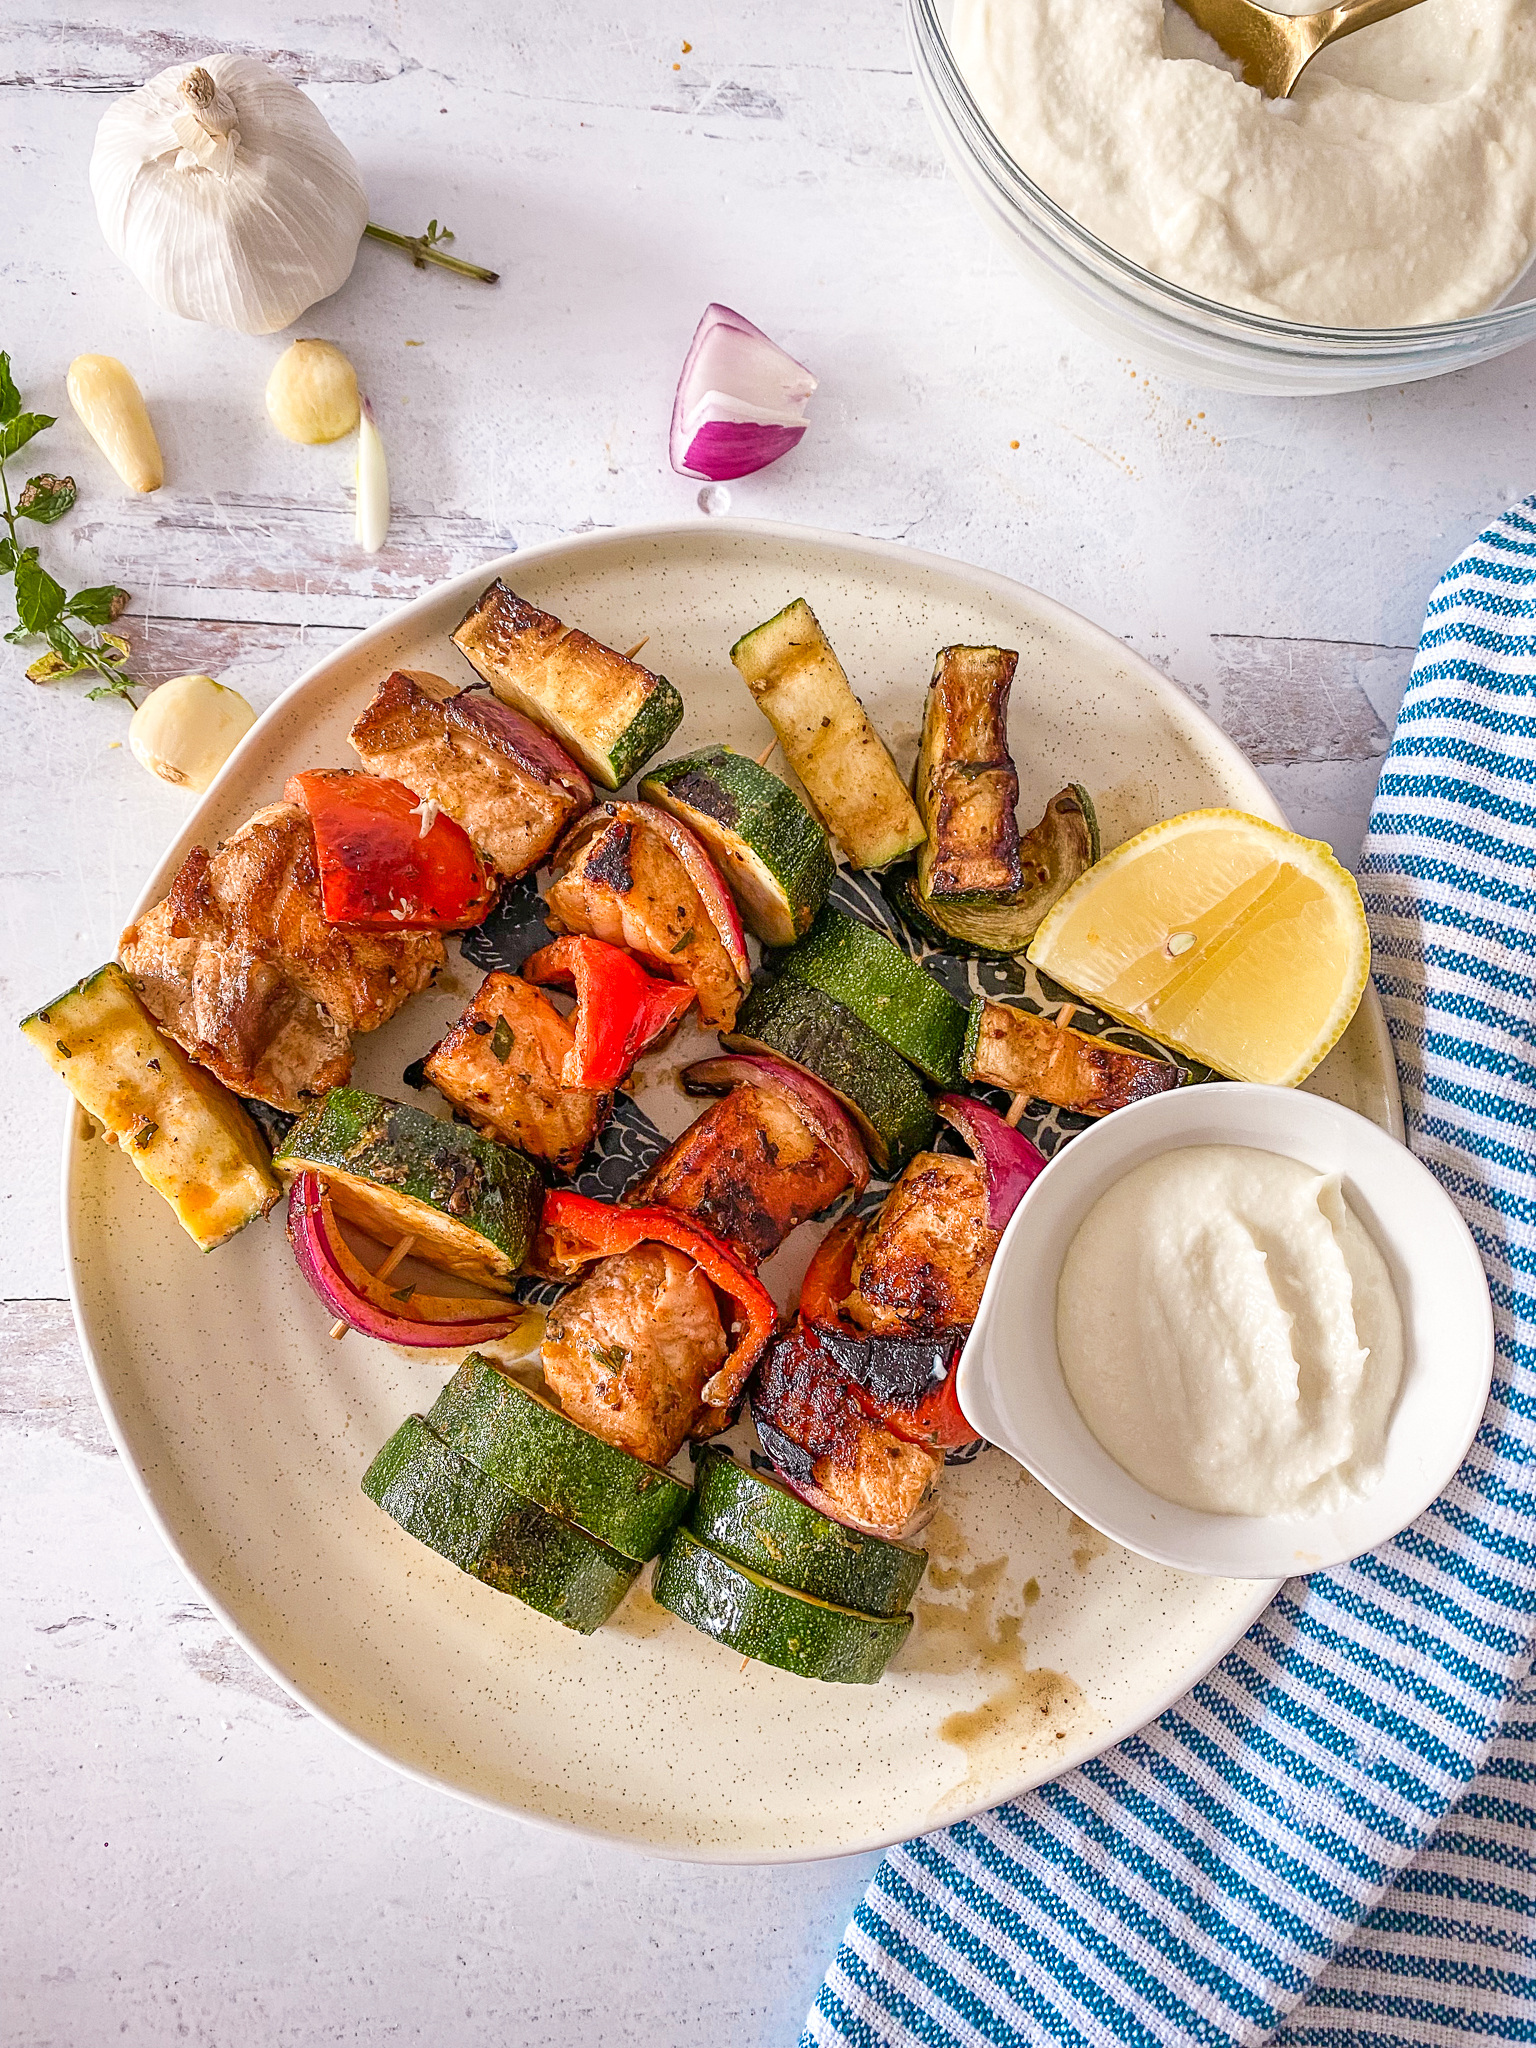 Whipped Lebanese Garlic adds a kick to these salmon kabobs.